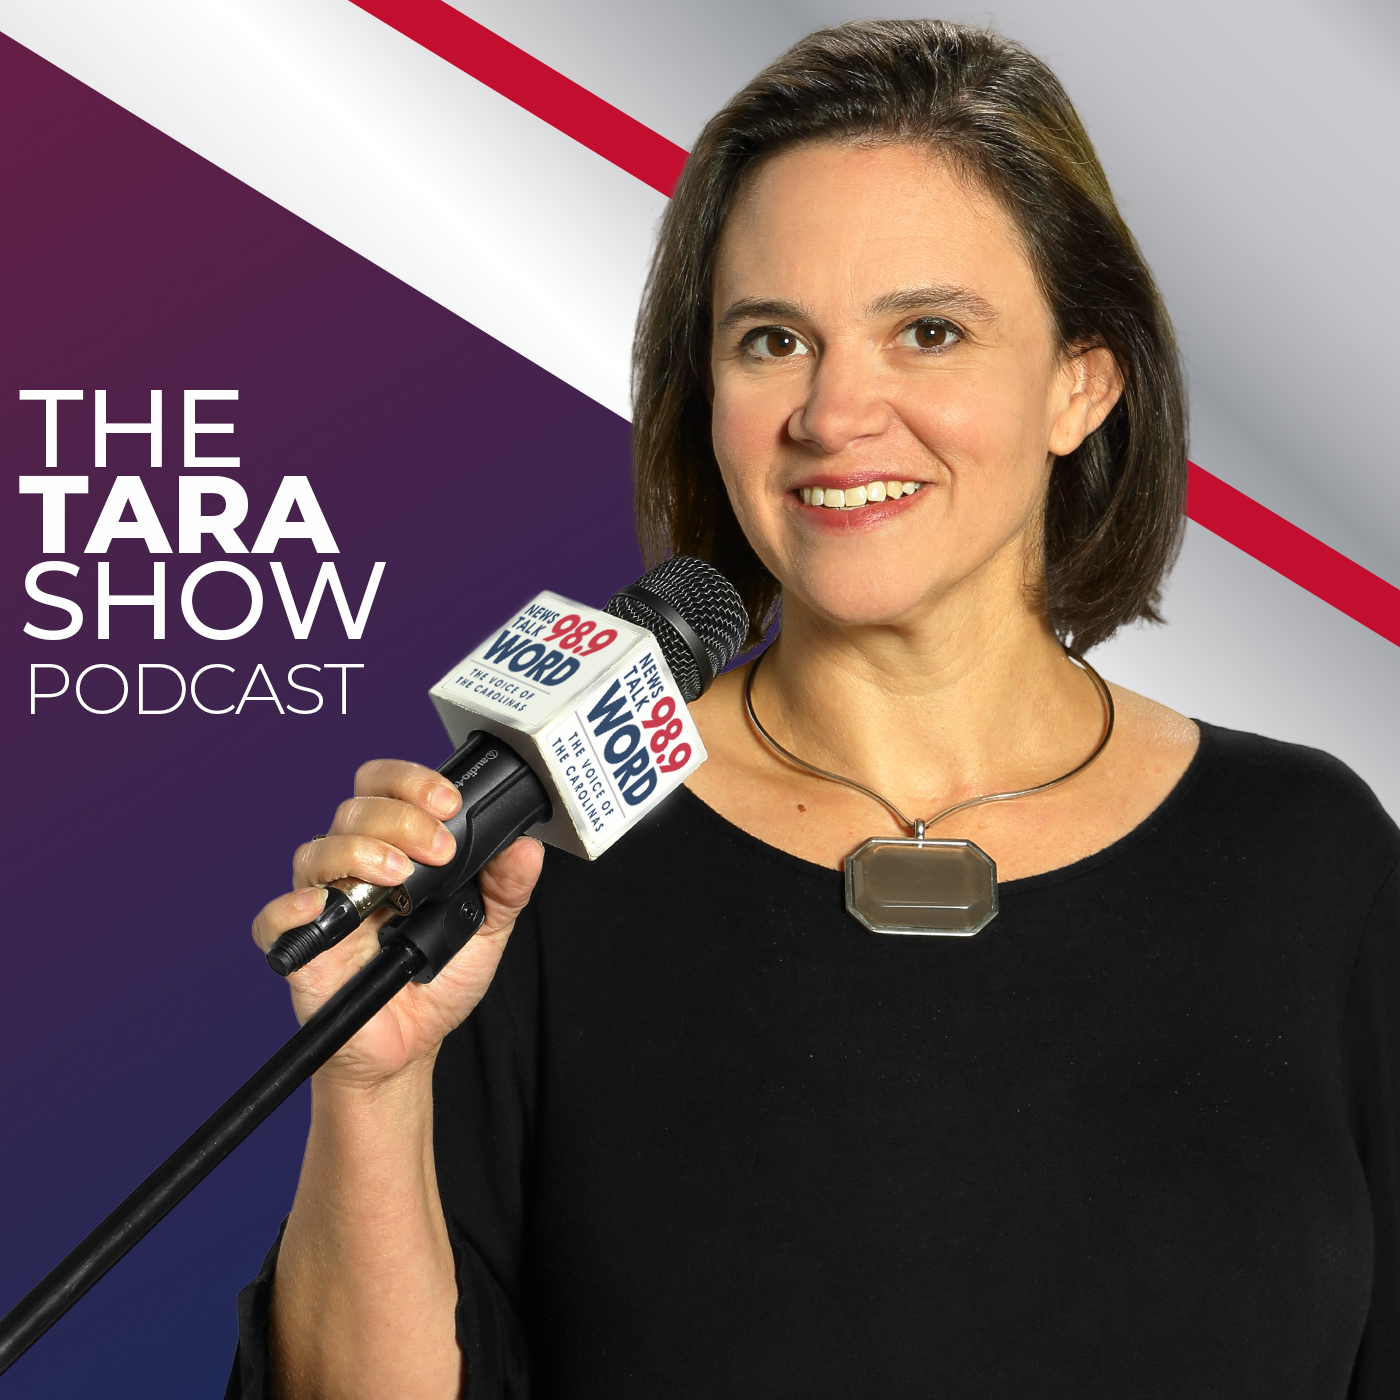 Hour 1: The Tara Show - “The Democrat Party is Over” “The Cost of Liberal Privilege” “Cultural Victories” “Top Regrets for Gen Z”